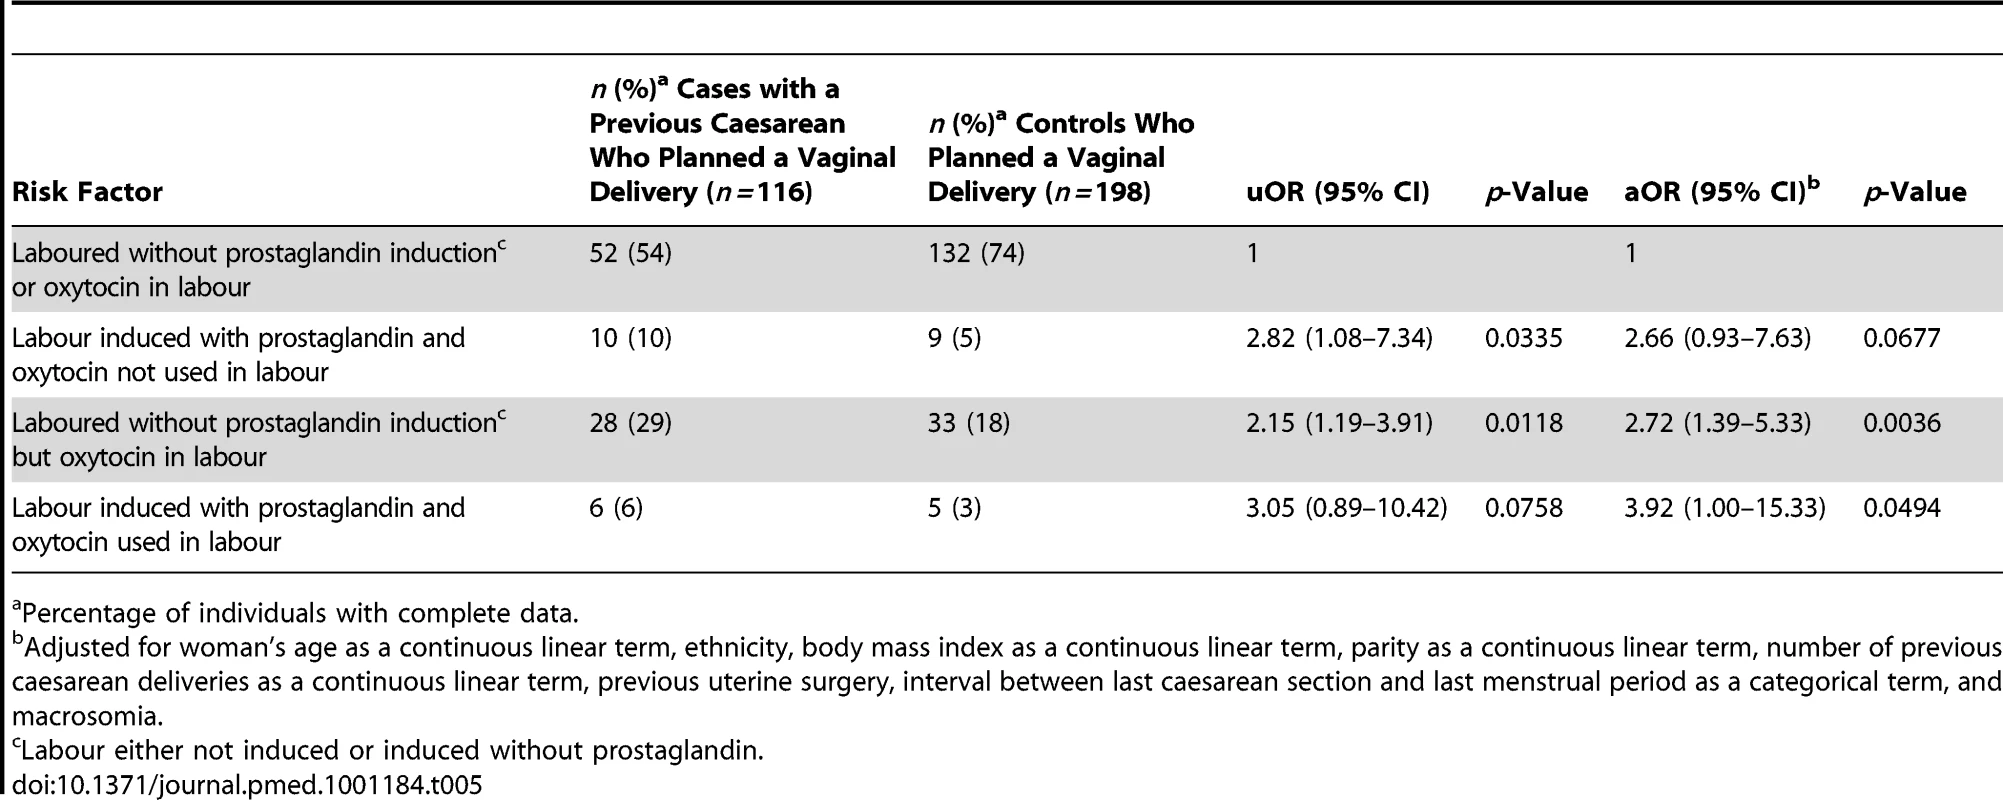 Risk factors for uterine rupture in women with prior delivery by caesarean section who planned to have a vaginal delivery in current pregnancy.